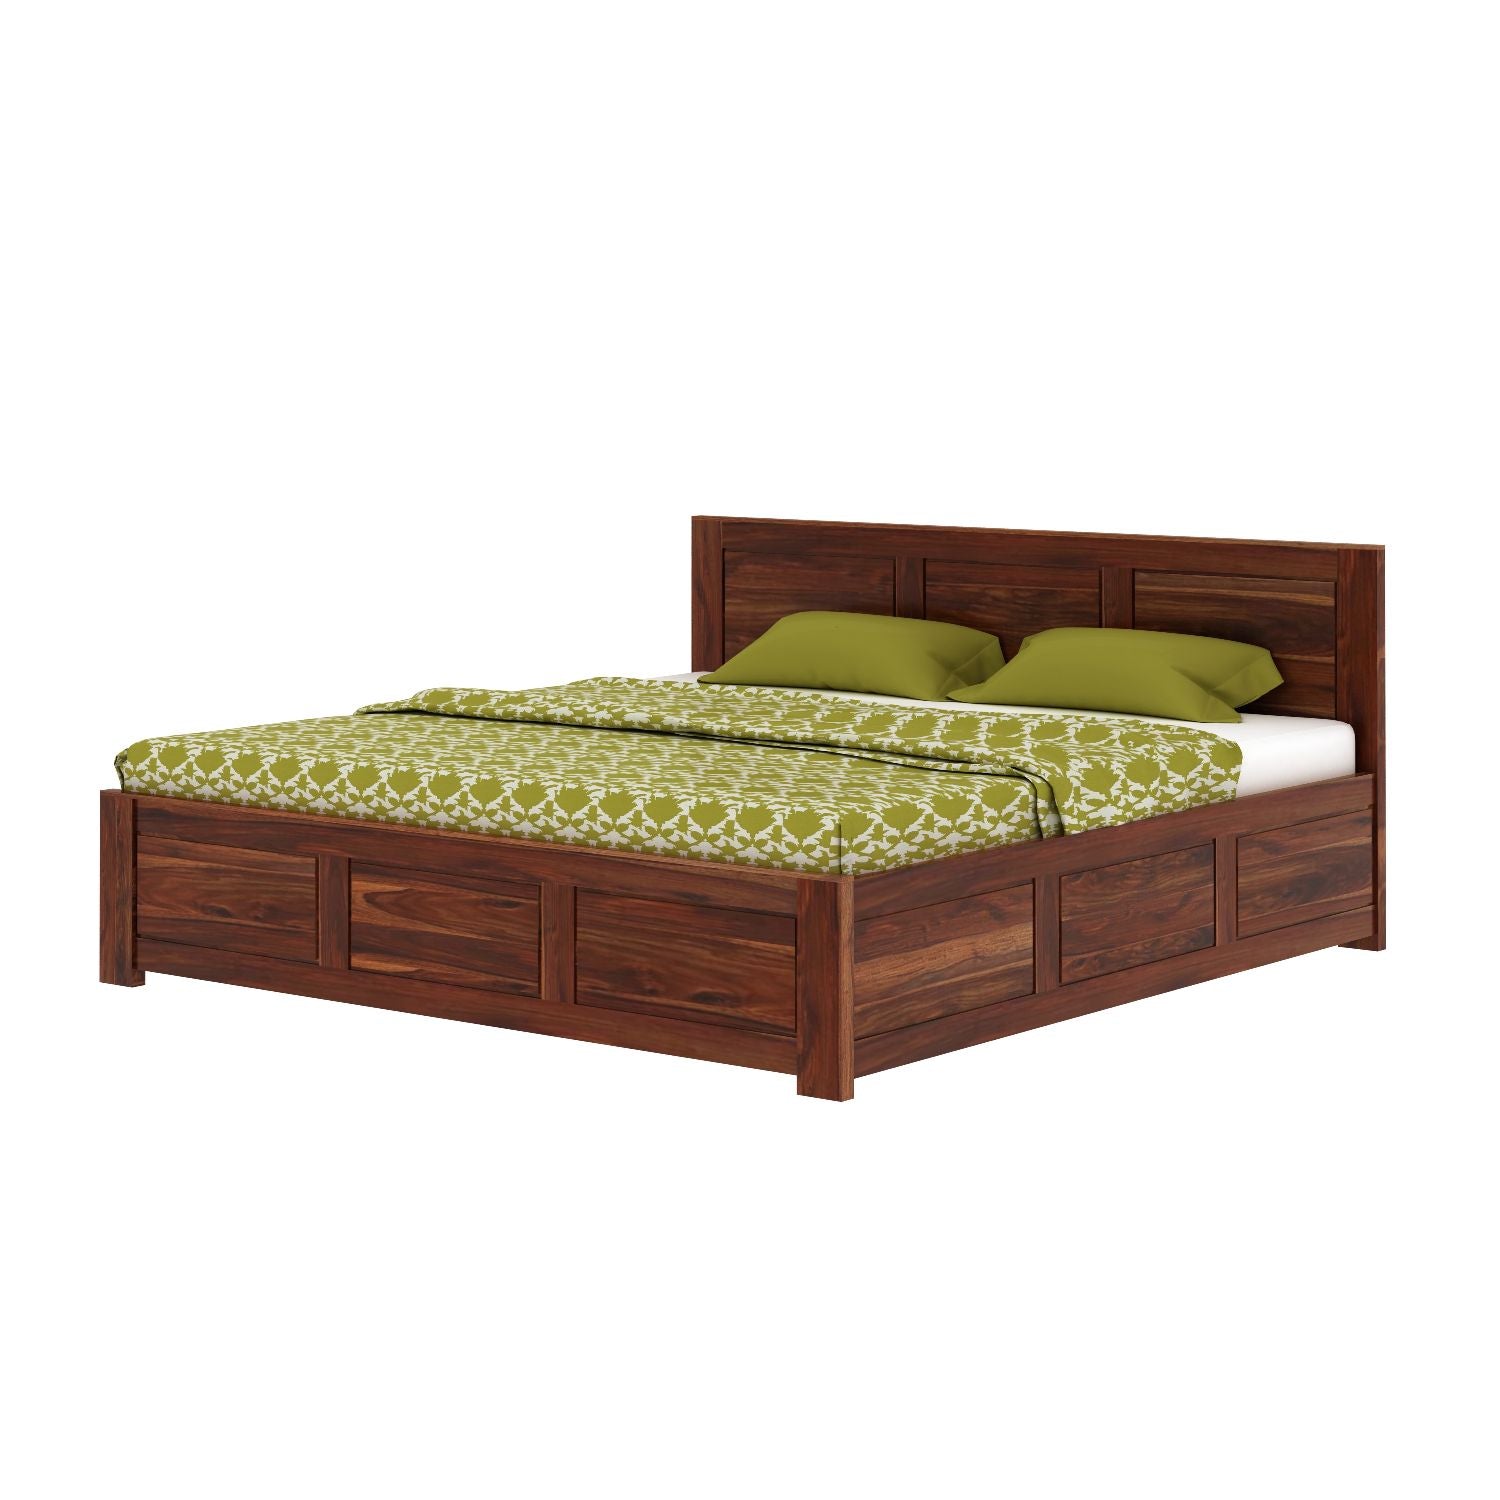 Woodwing Solid Sheesham Wood Hydraulic Bed With Box Storage (King Size, Natural Finish)